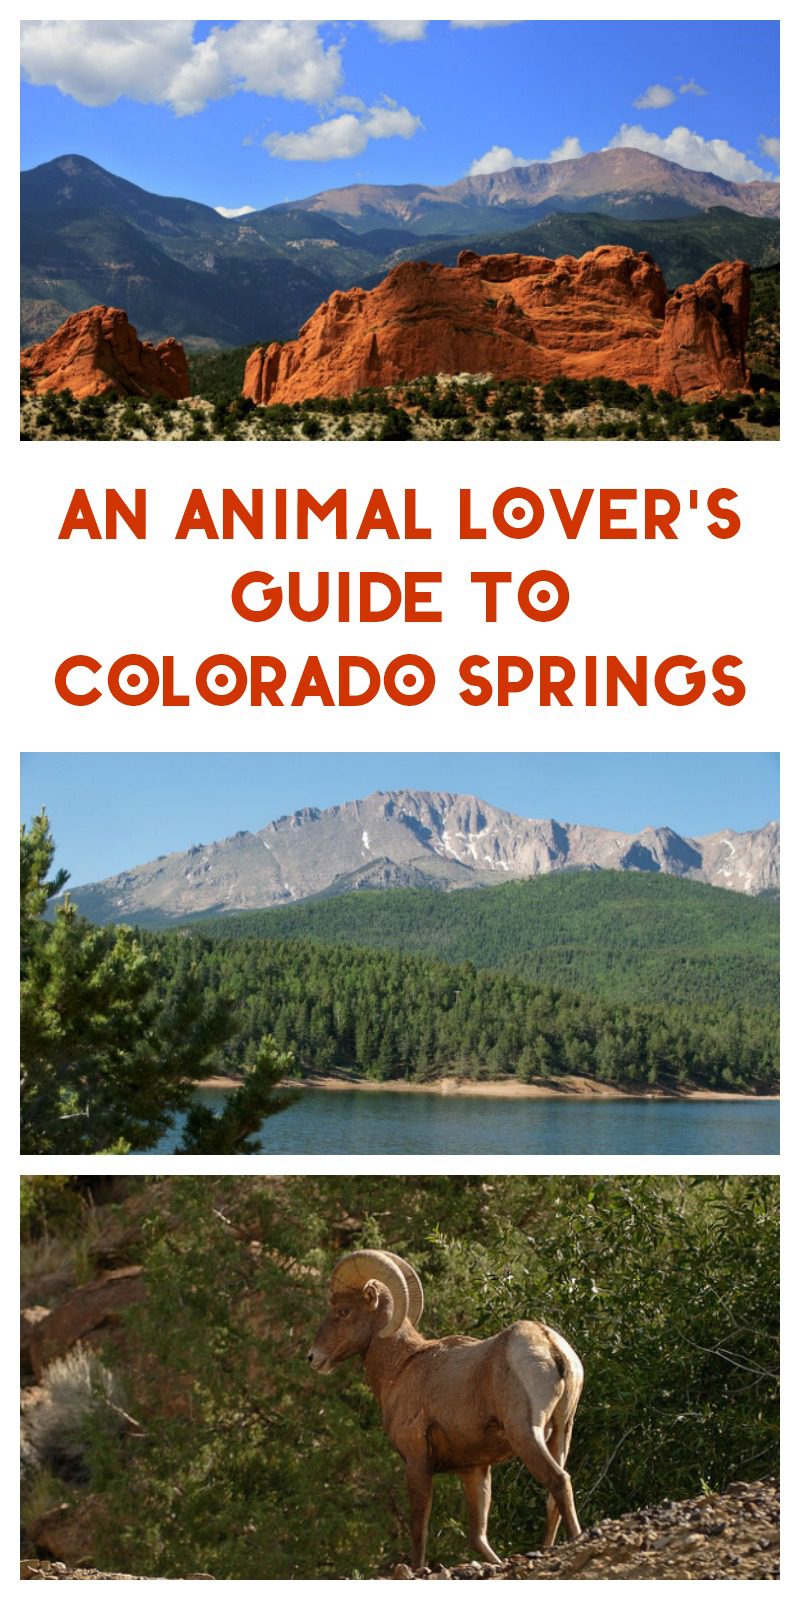 We are huge animal lovers in my family, so our trips always include some way to see local wildlife. In that spirit, I've created an animal lover's guide to Colorado Springs. Let's check it out!